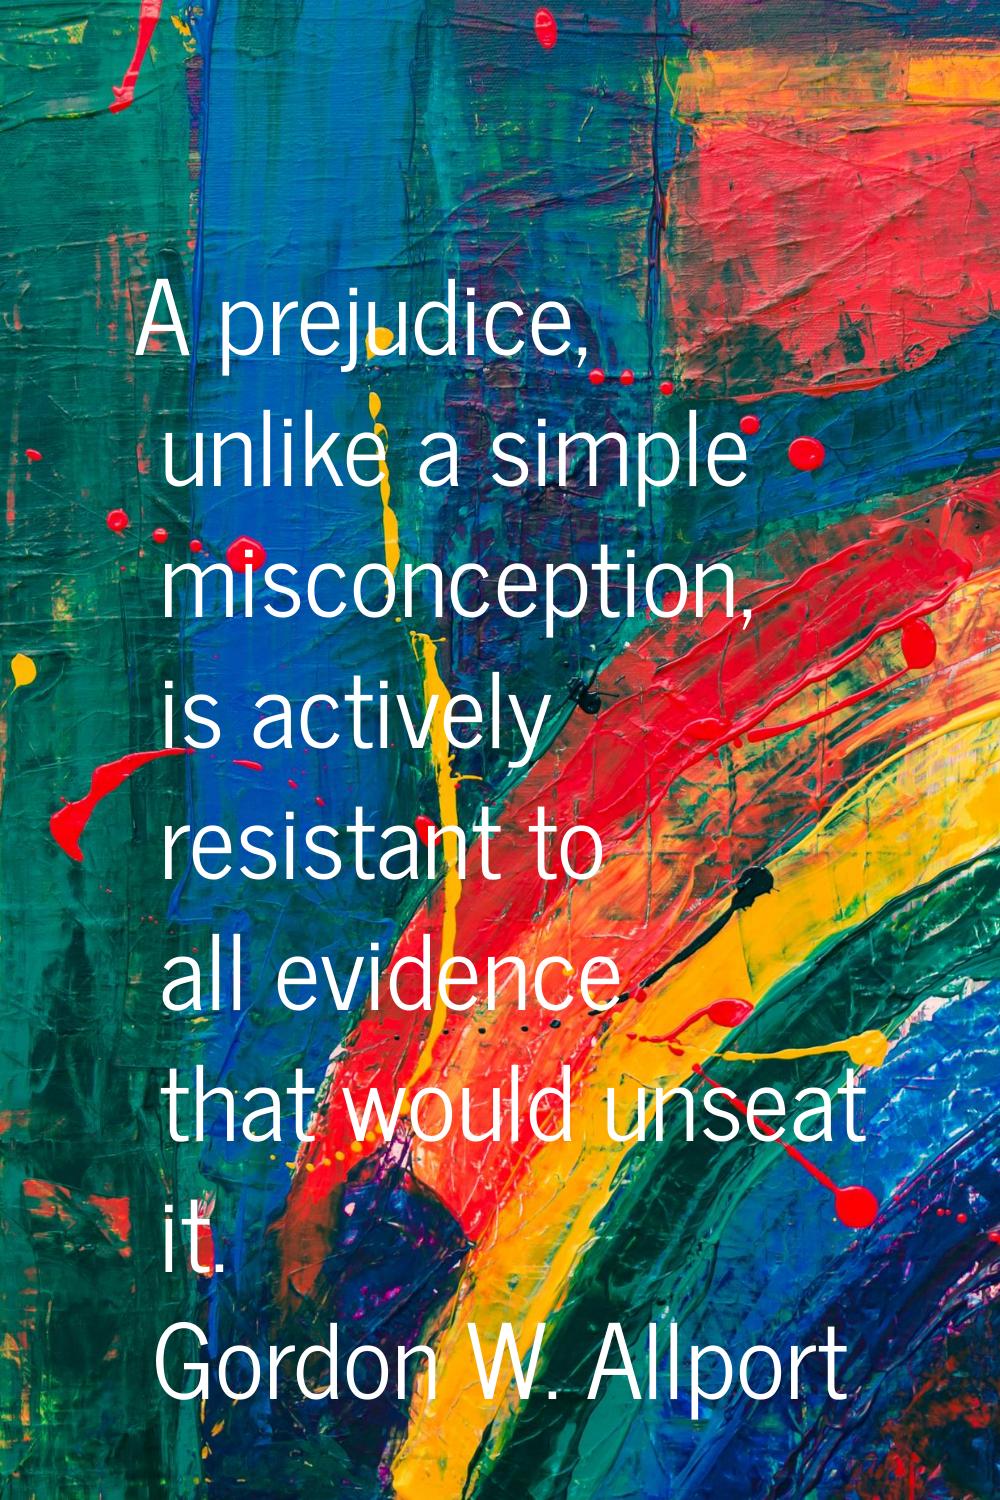 A prejudice, unlike a simple misconception, is actively resistant to all evidence that would unseat